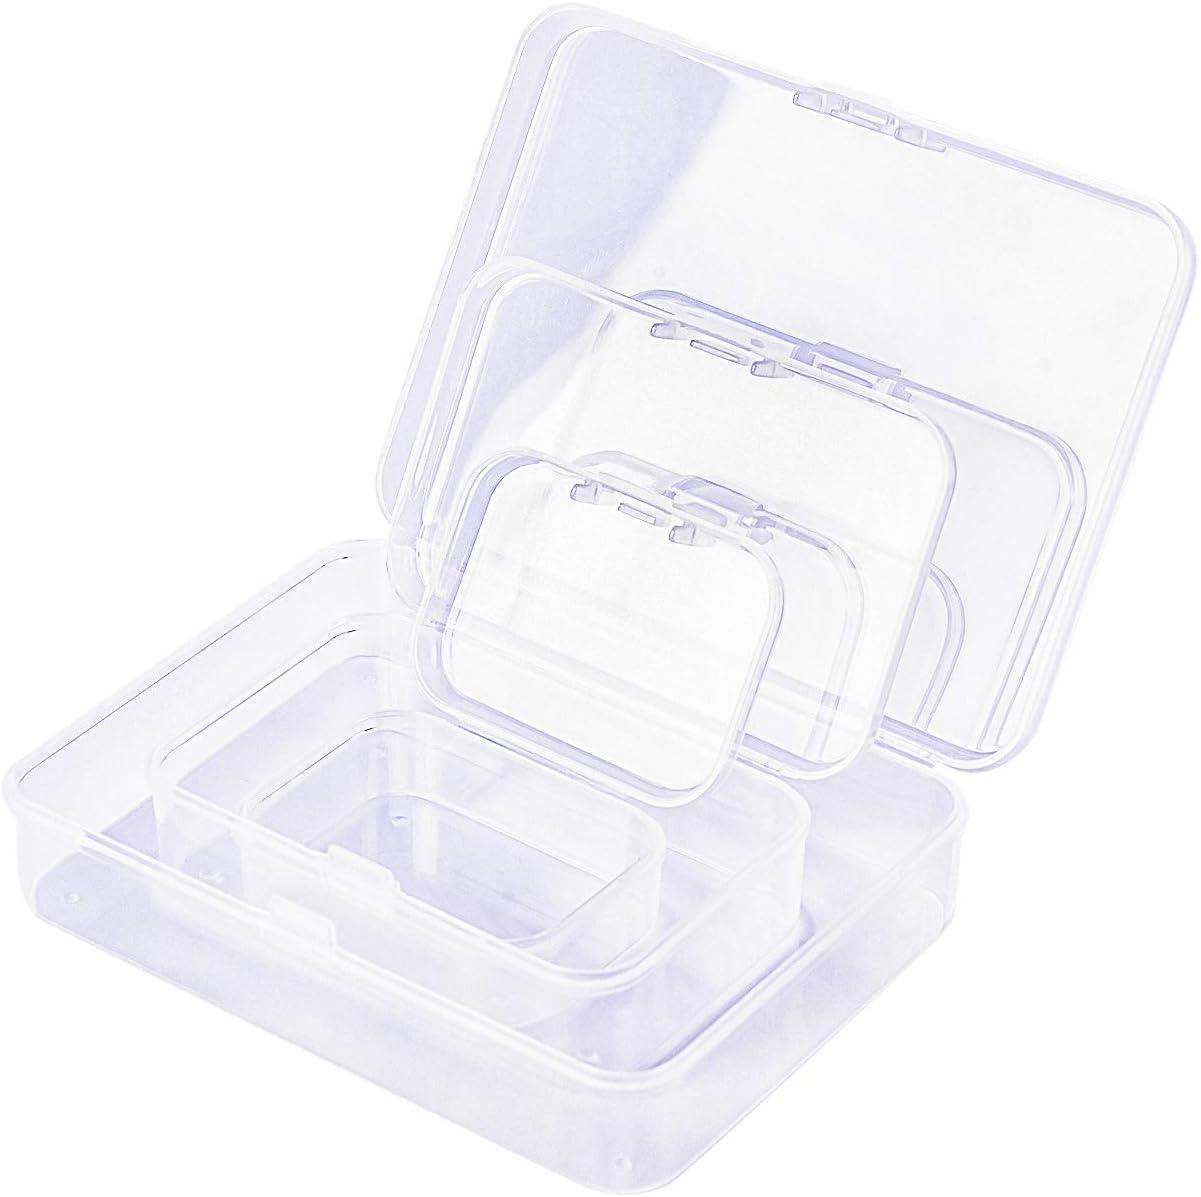 LJY 32 Pieces Mixed Sizes Square Empty Mini Clear Plastic Storage  Containers Box Case with Lids for Small Items and Other Craft Projects -  LJY Technology Inc Official Website, Containers For Beads